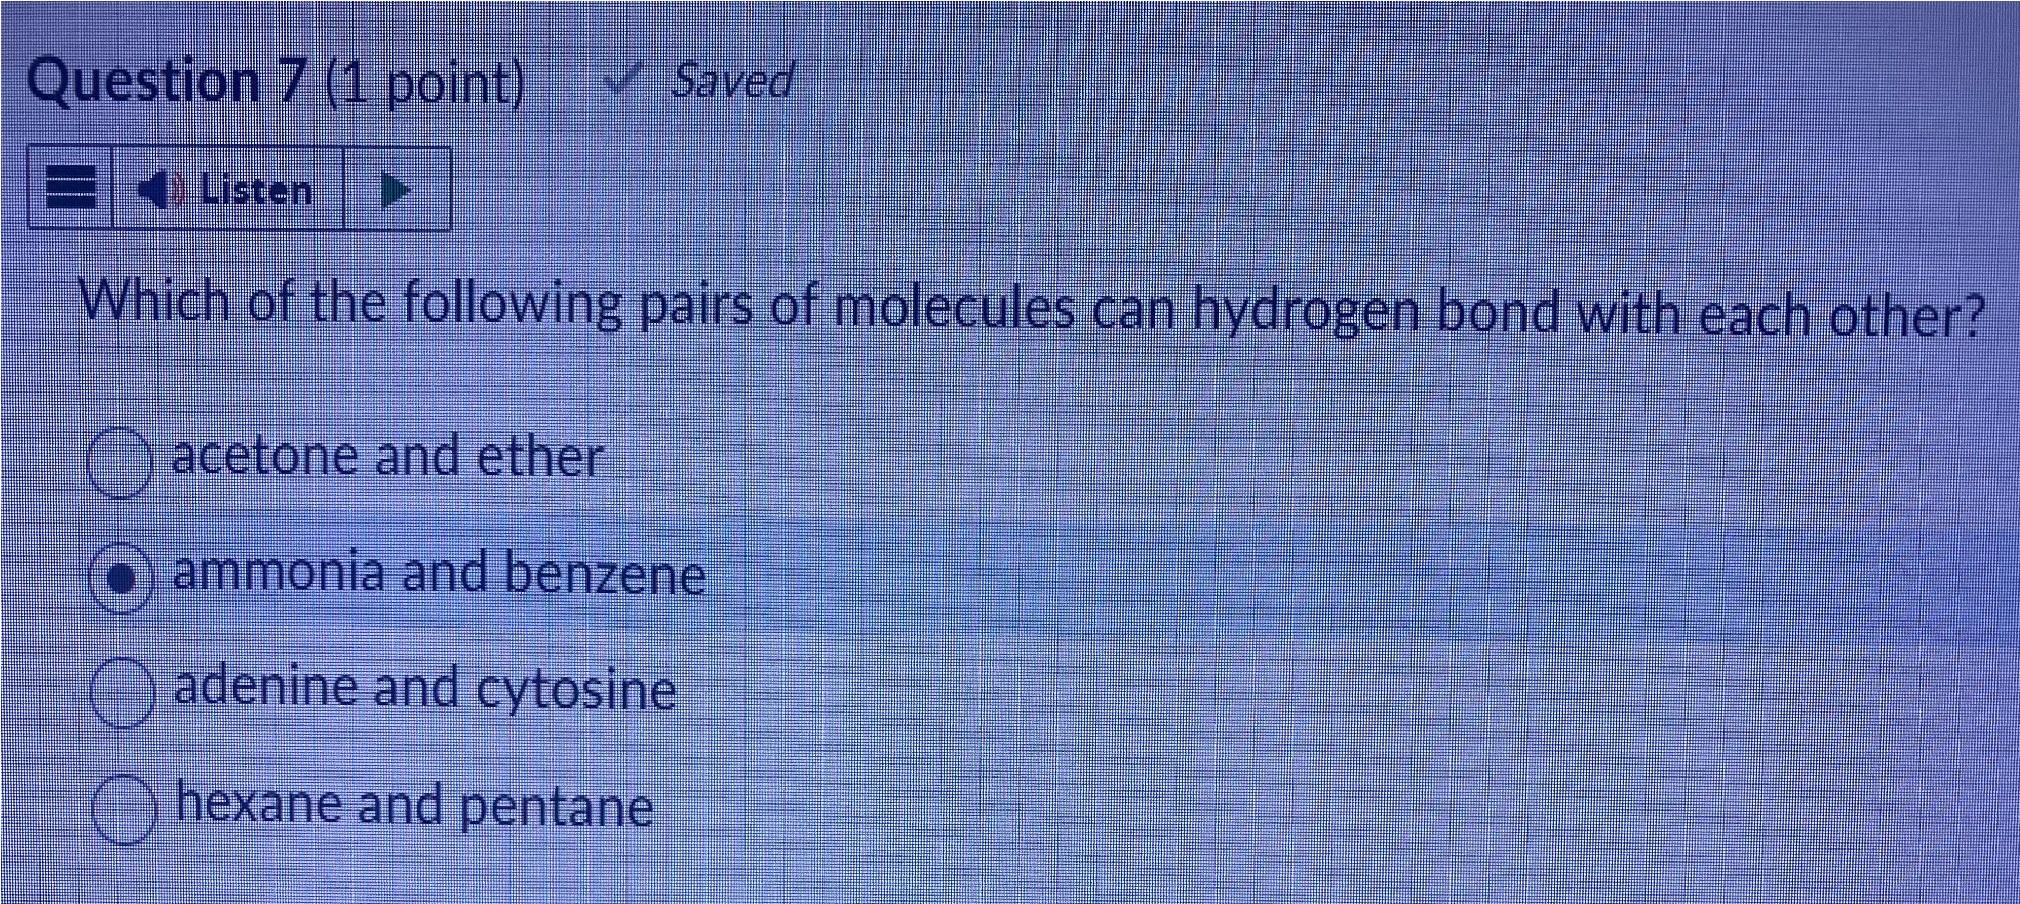 Which of the following pairs of molecules can hydrogen bond with each other?
acetone and ether
ammonia and benzene
adenine an